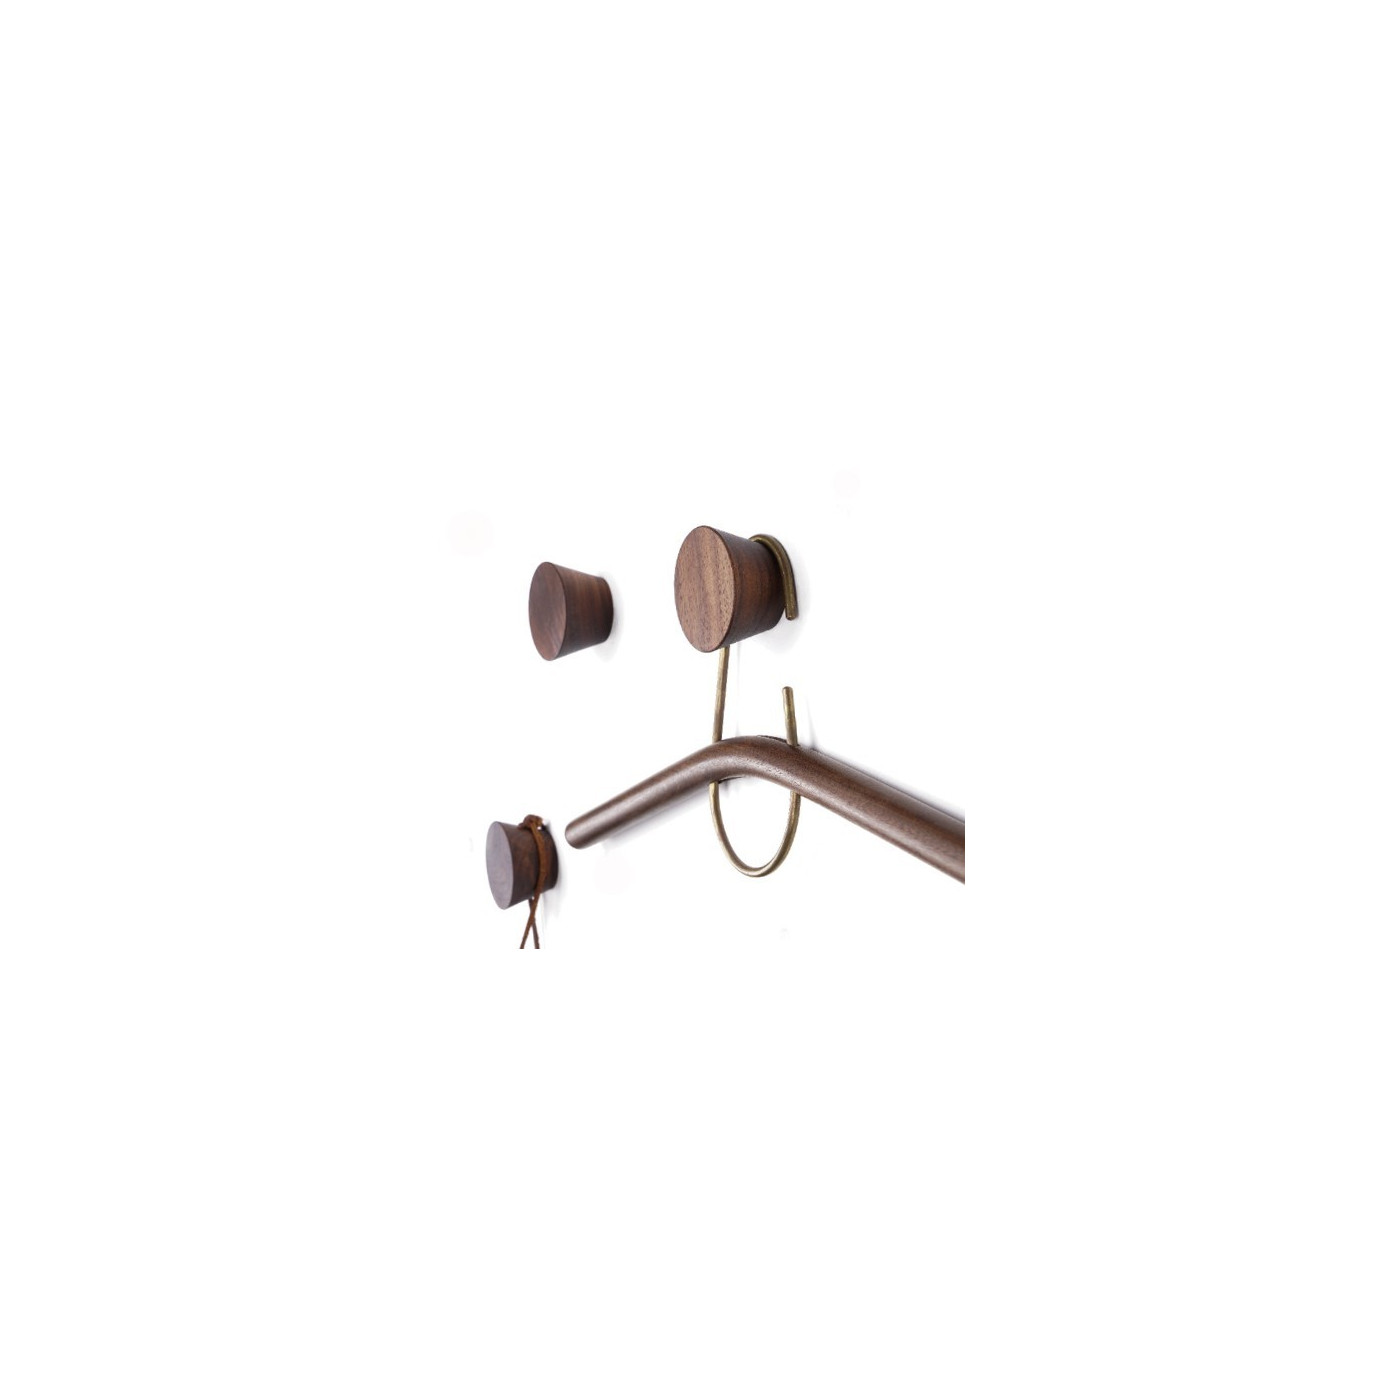 Set of 4 strong wooden clothes hooks (walnut, nr 2 on the photo)